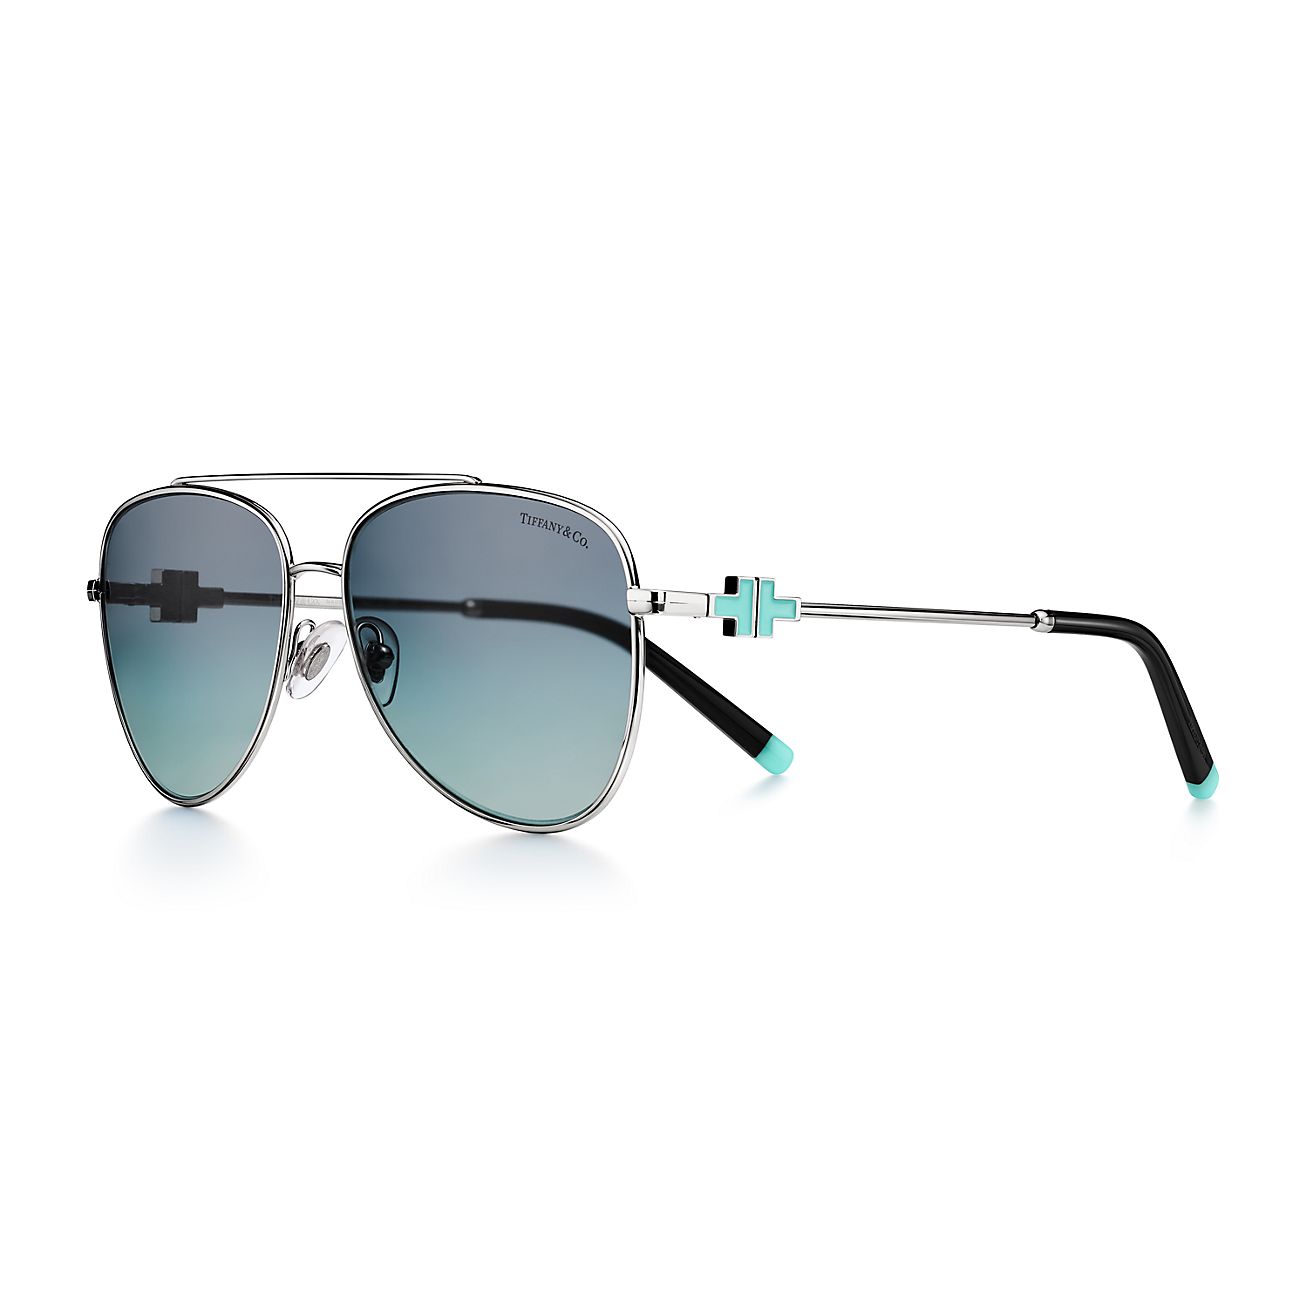 Tiffany T Pilot Sunglasses in Silver-Colored Metal with Gradient Blue Lenses